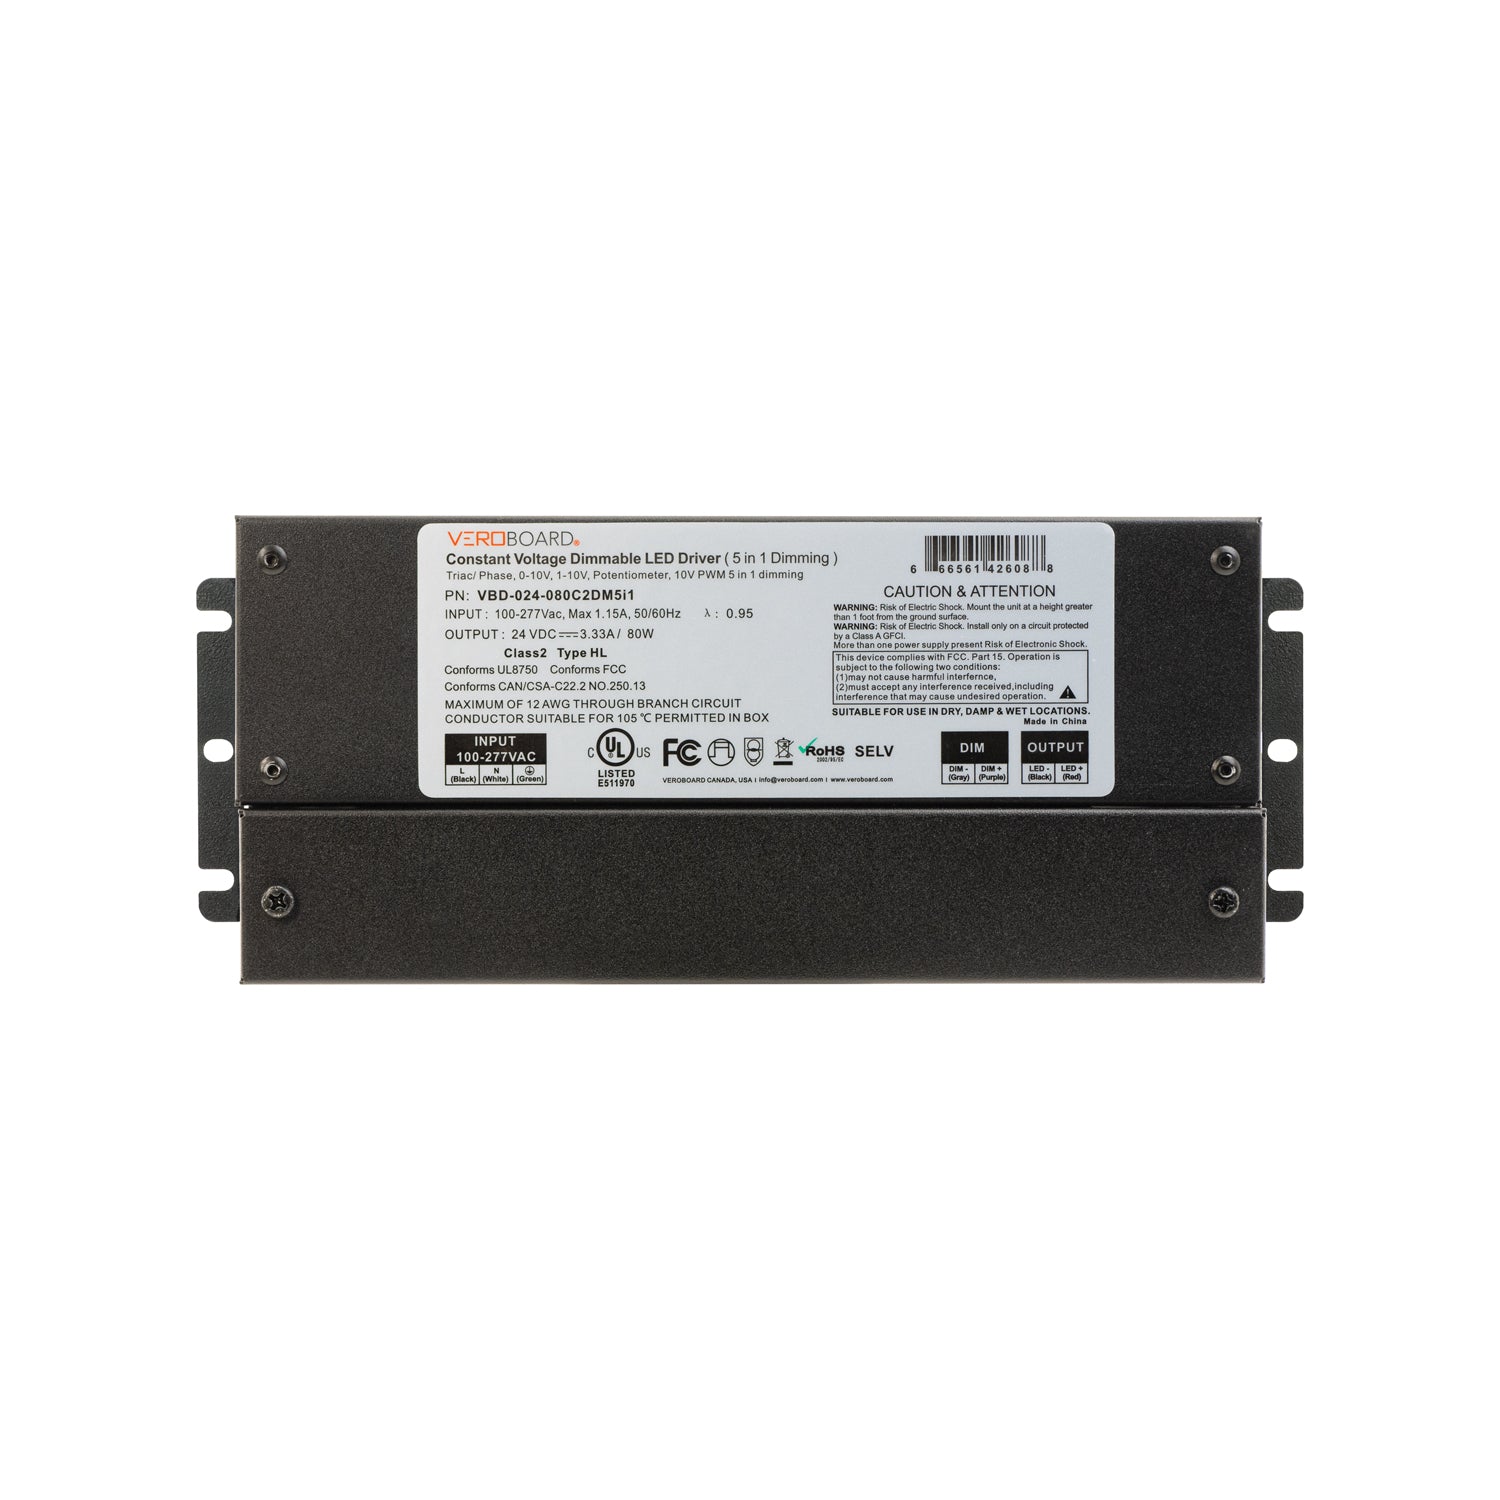 VBD-024-080C2DM5i1 Constant Voltage Dimmable Driver (5 in 1), Veroboard